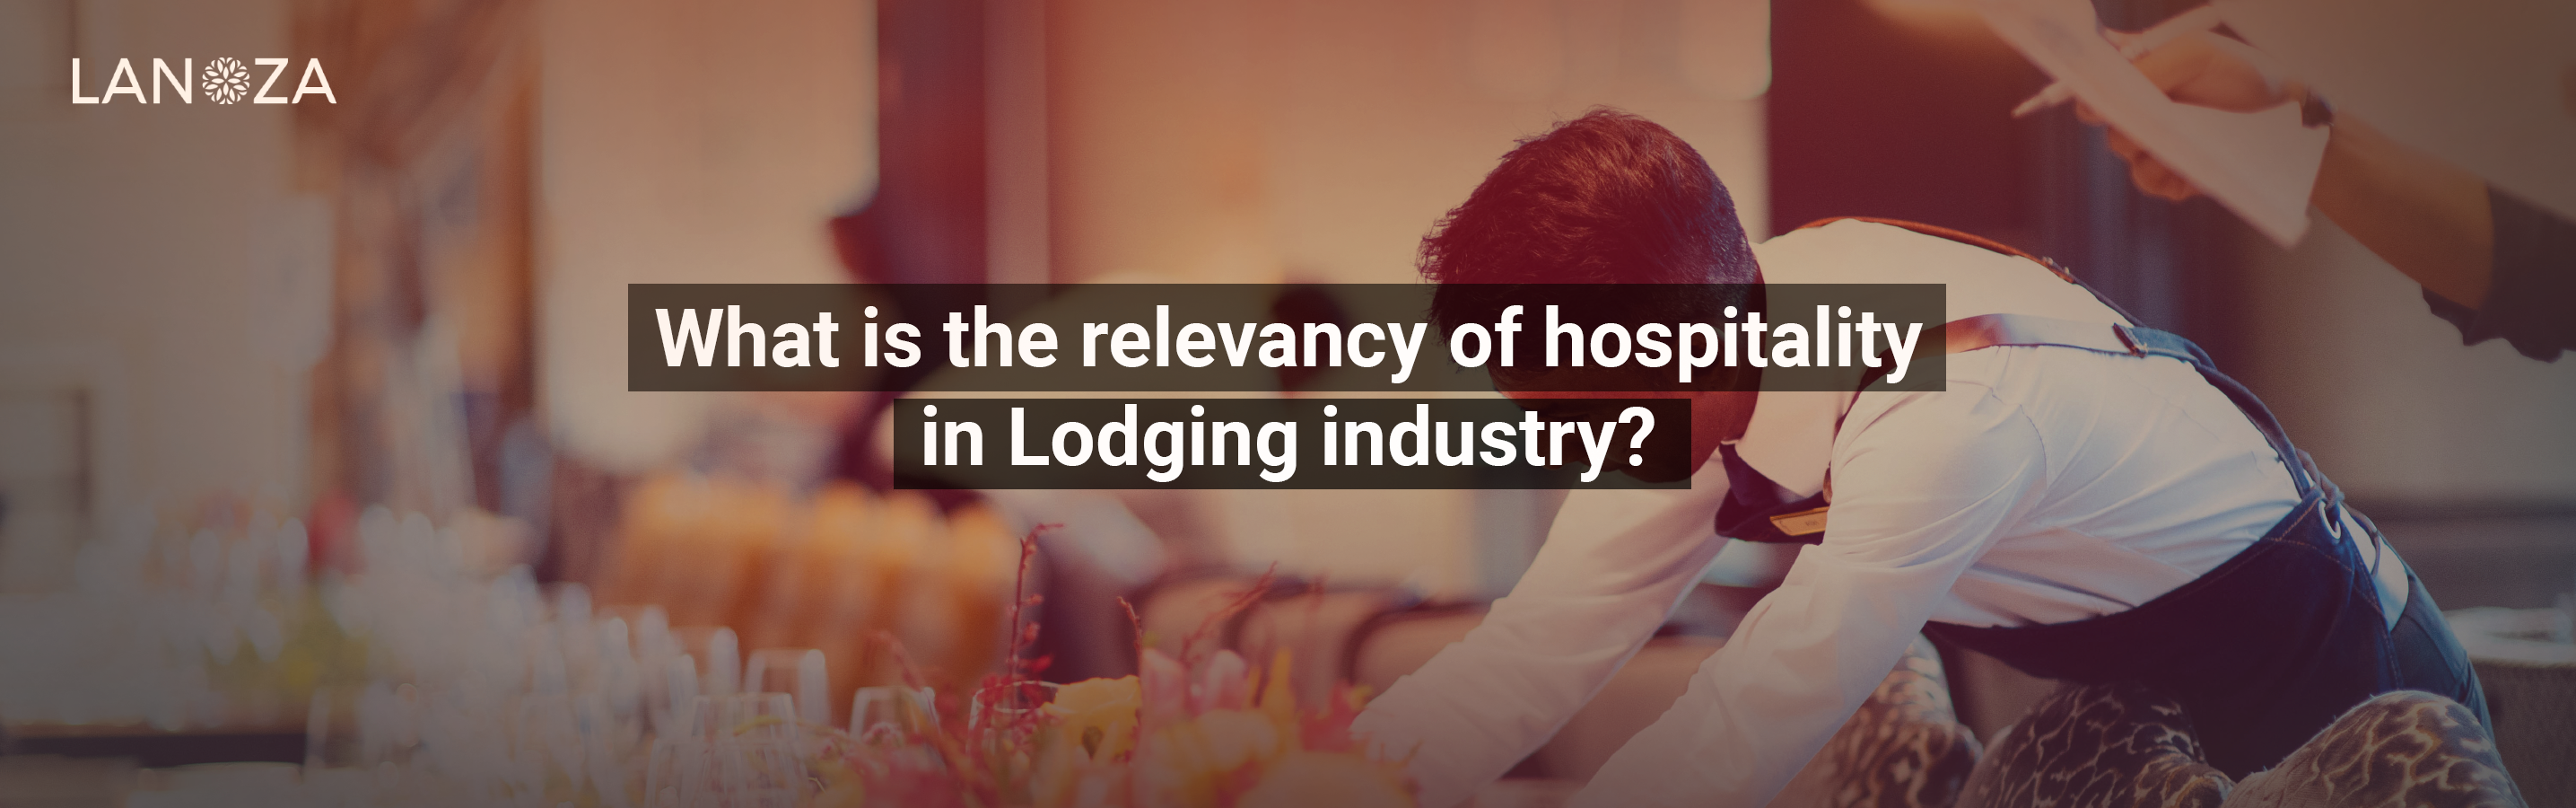 what-is-the-relevancy-of-hospitality-in-lodging-industry